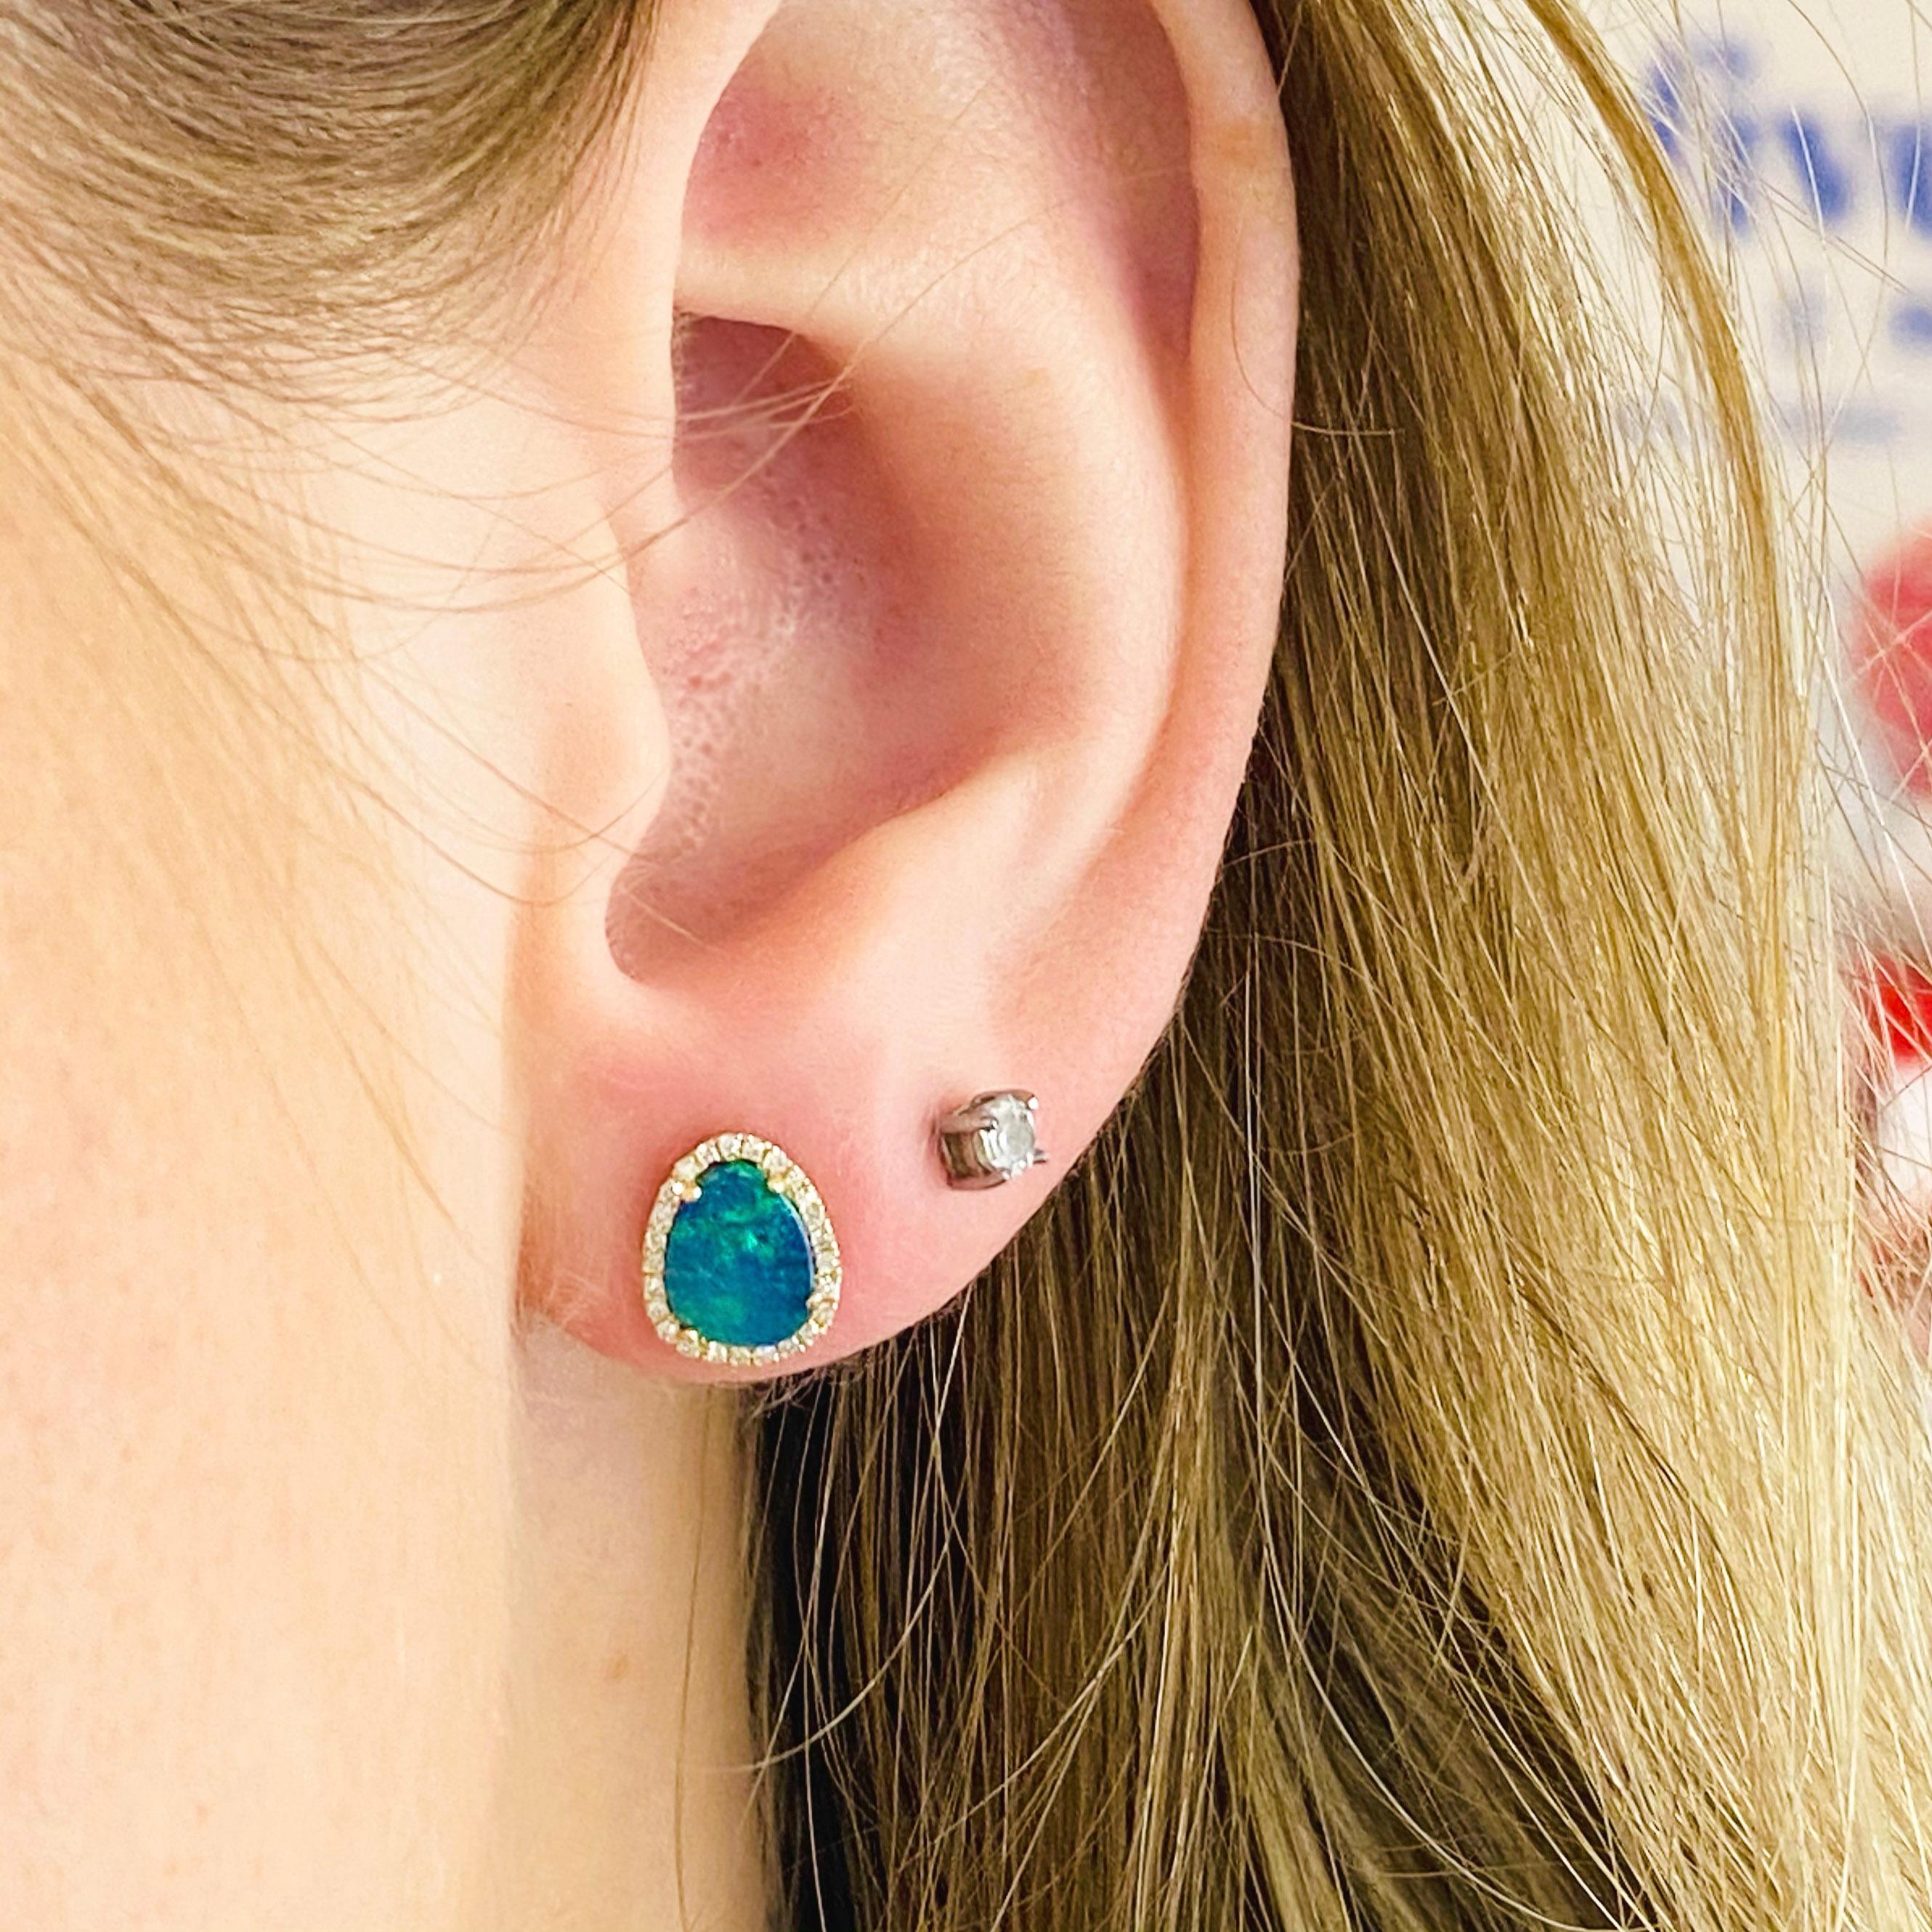 These organic blue opal earrings are to die for!  The opal is incredibly bright and looks gorgeous with a halo of diamonds around each.  The stud design is the most popular type of earrings in our store!  This is the type of earring that you can